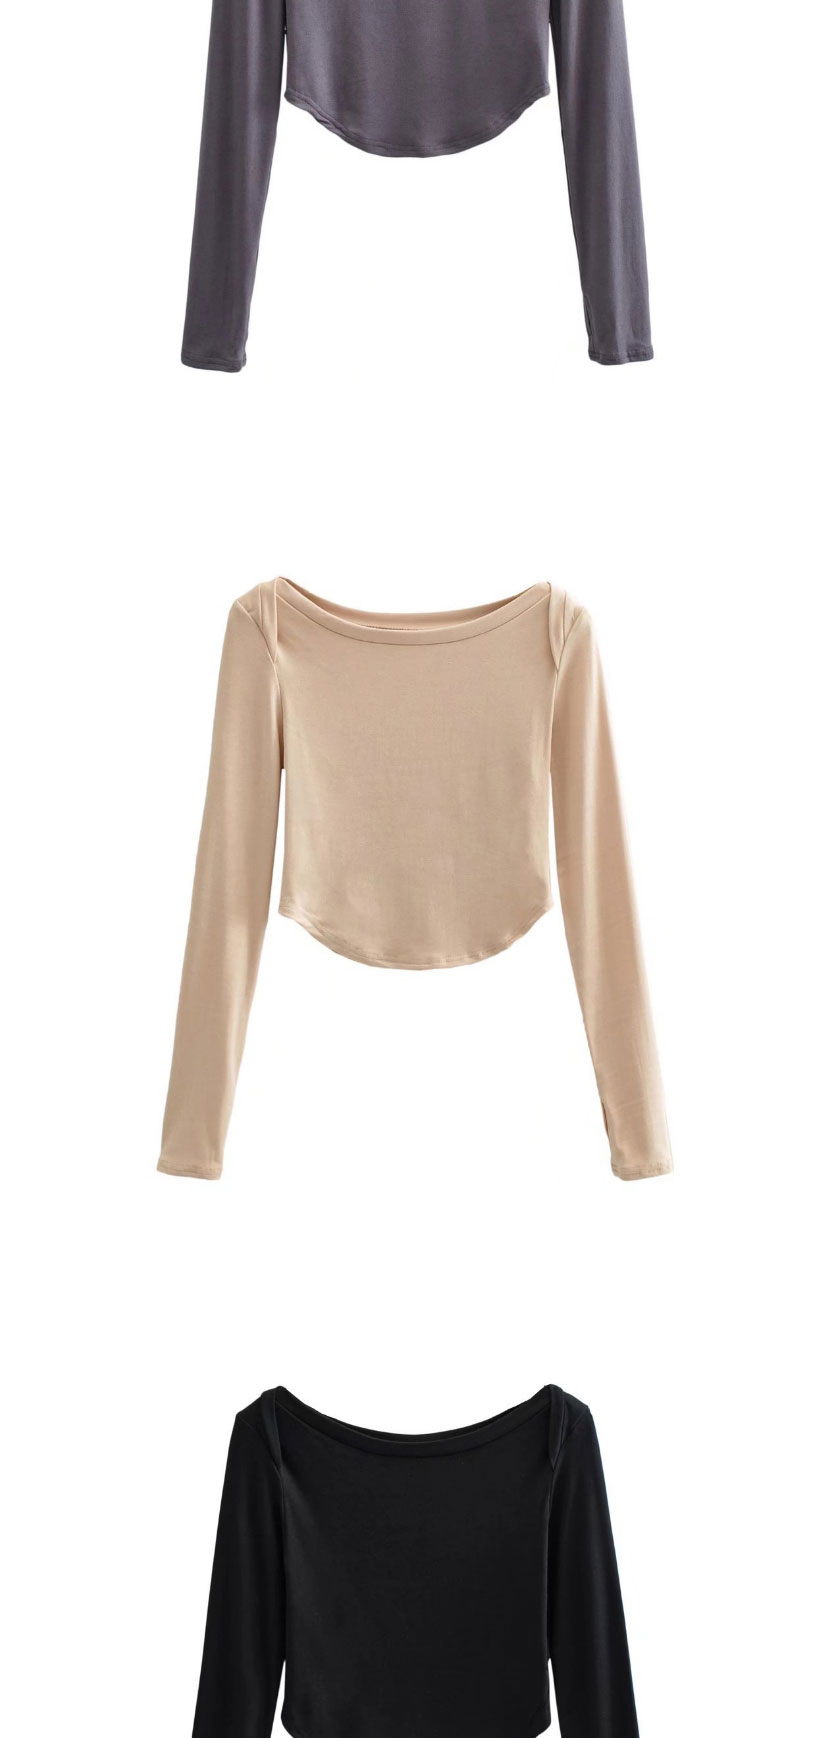 Fashion Apricot Solid Color Fingered Shoulder Long Sleeve Top,Hair Crown